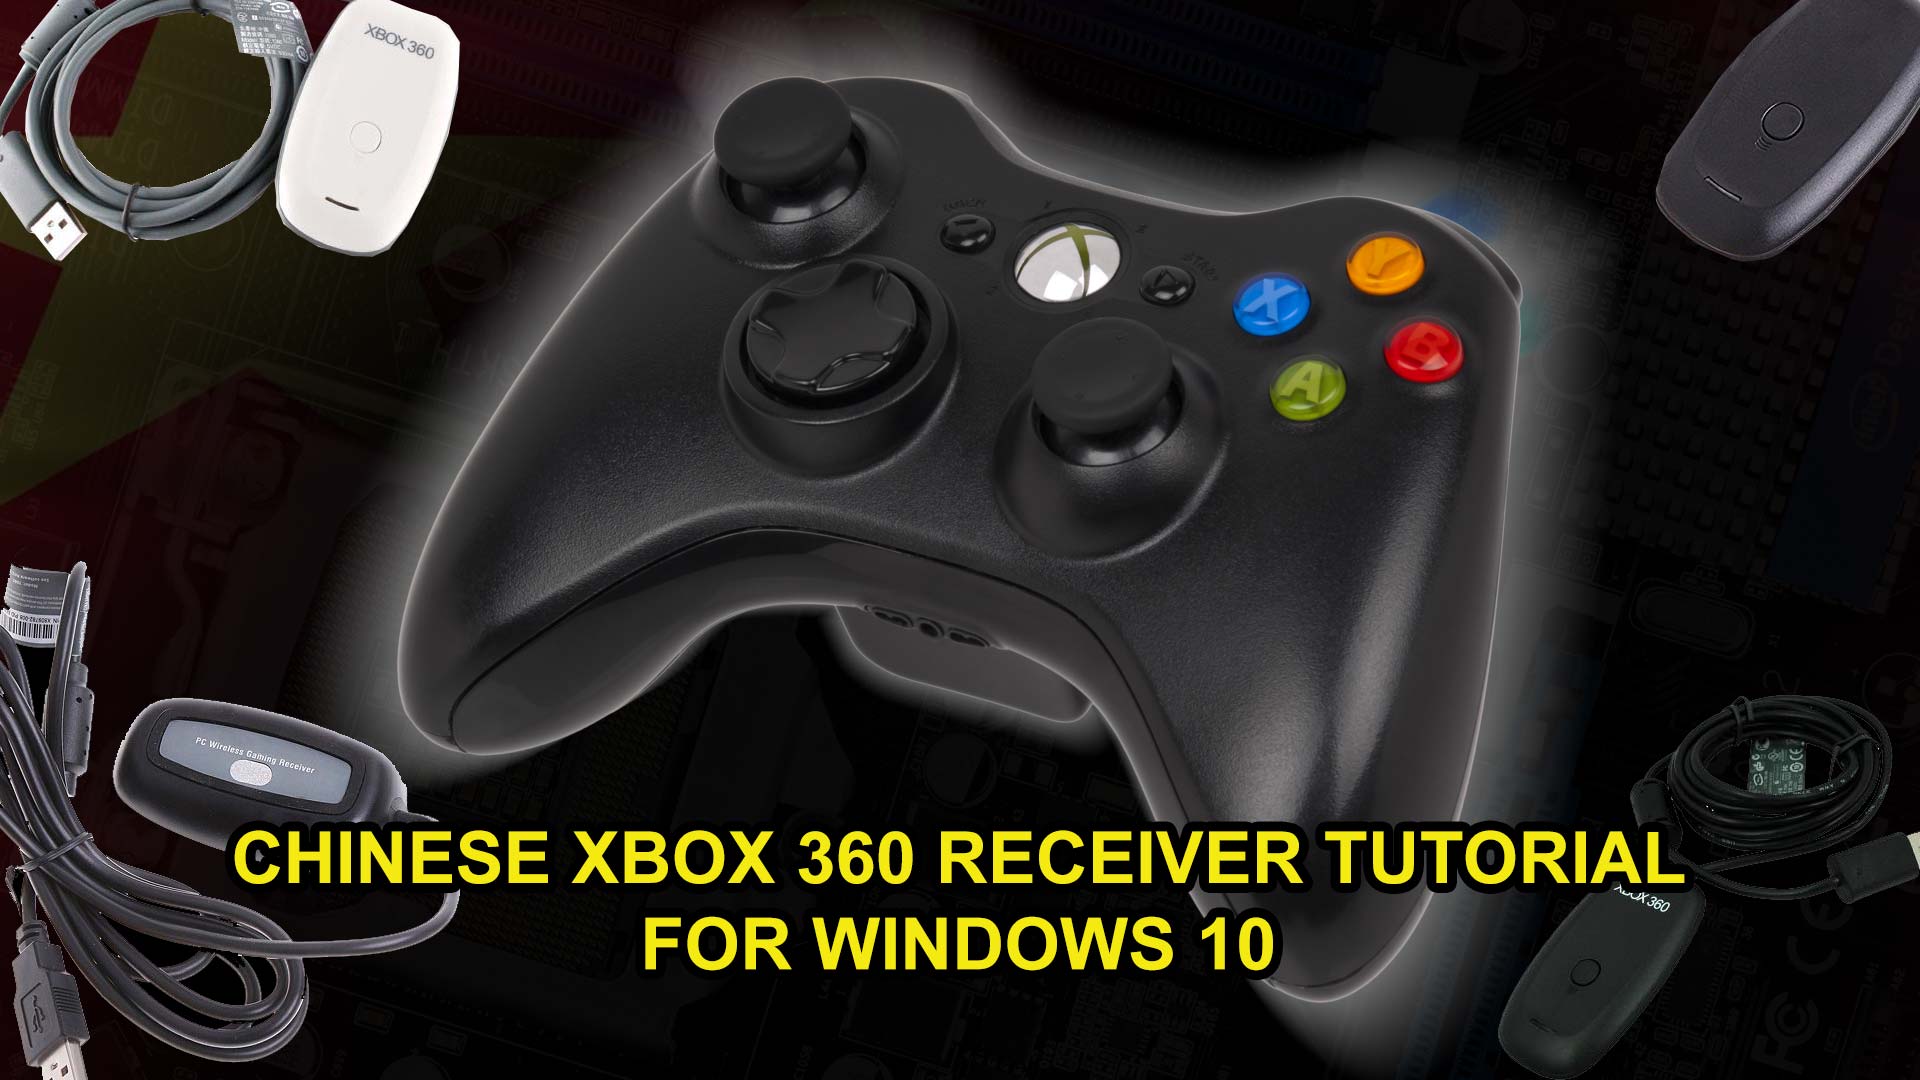 Usb game controller driver for windows 81 64 bit download